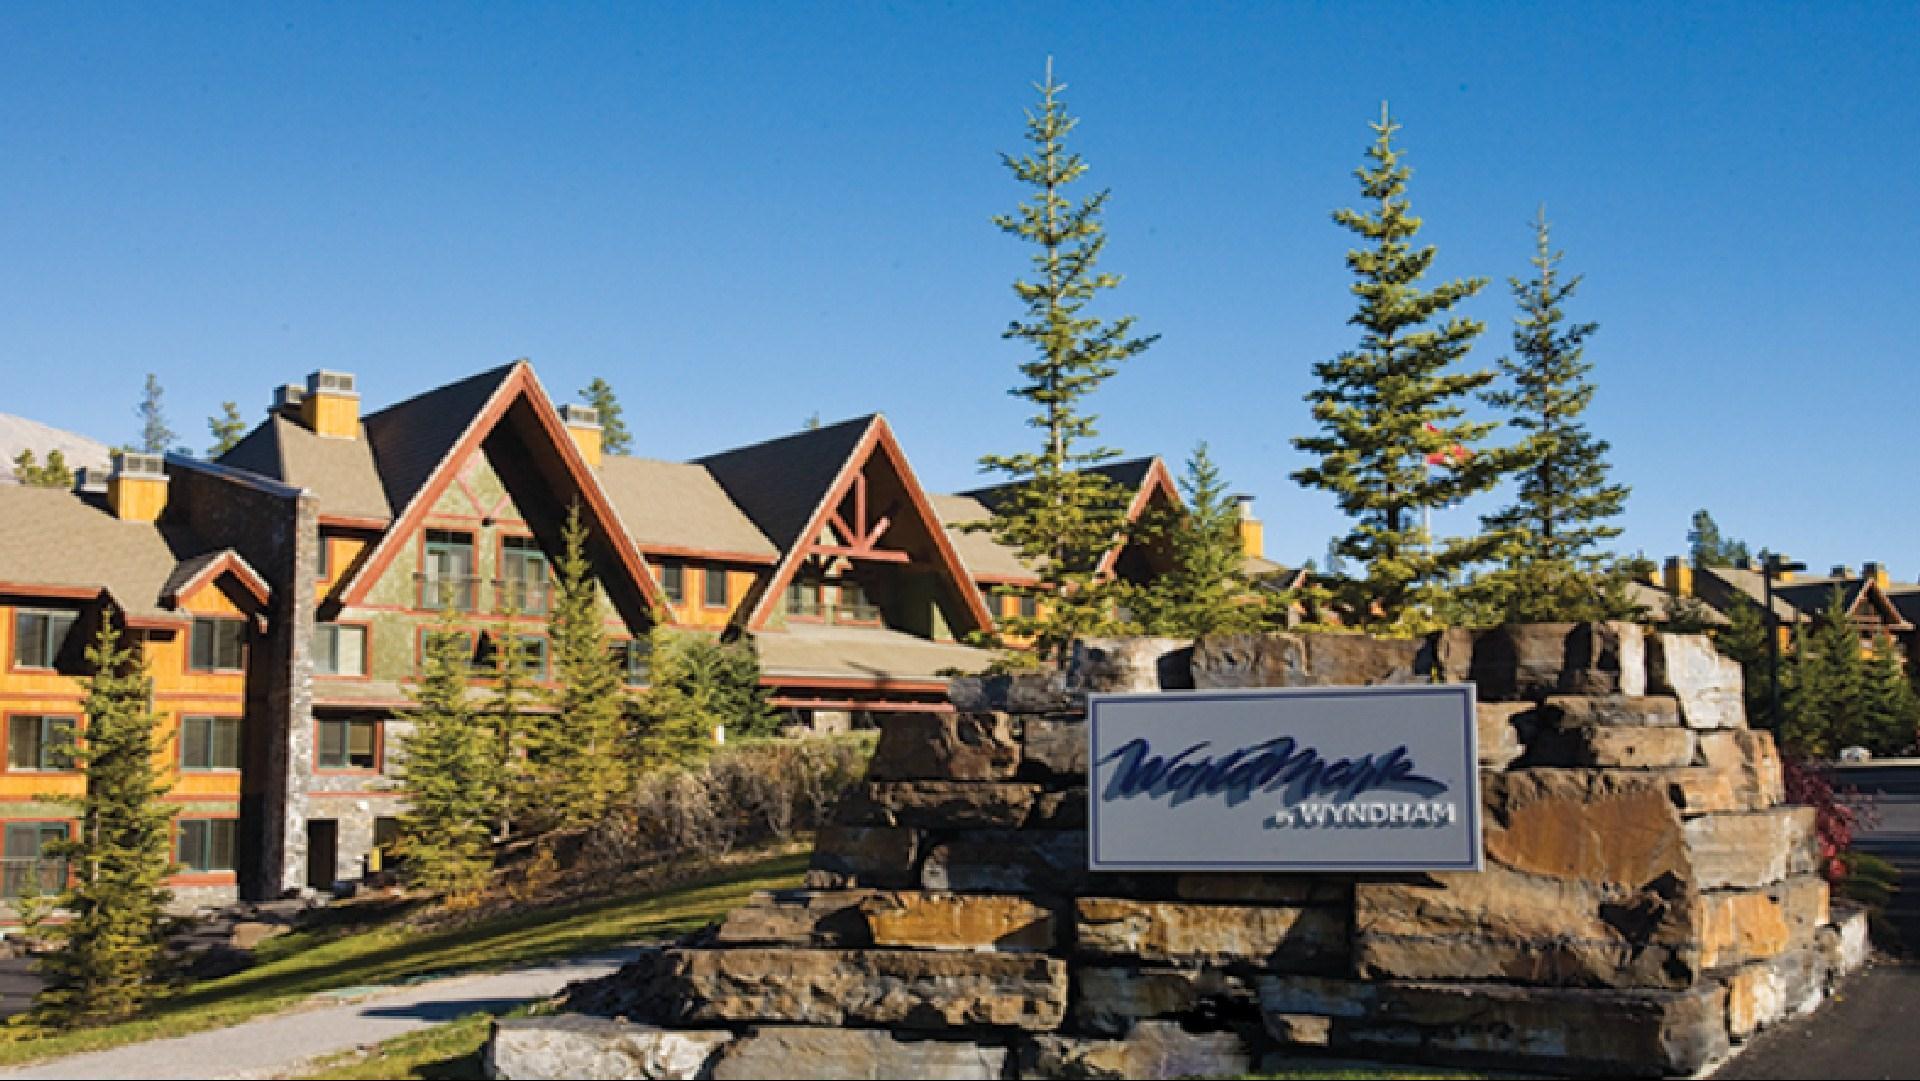 WorldMark Canmore - Banff in Canmore, AB